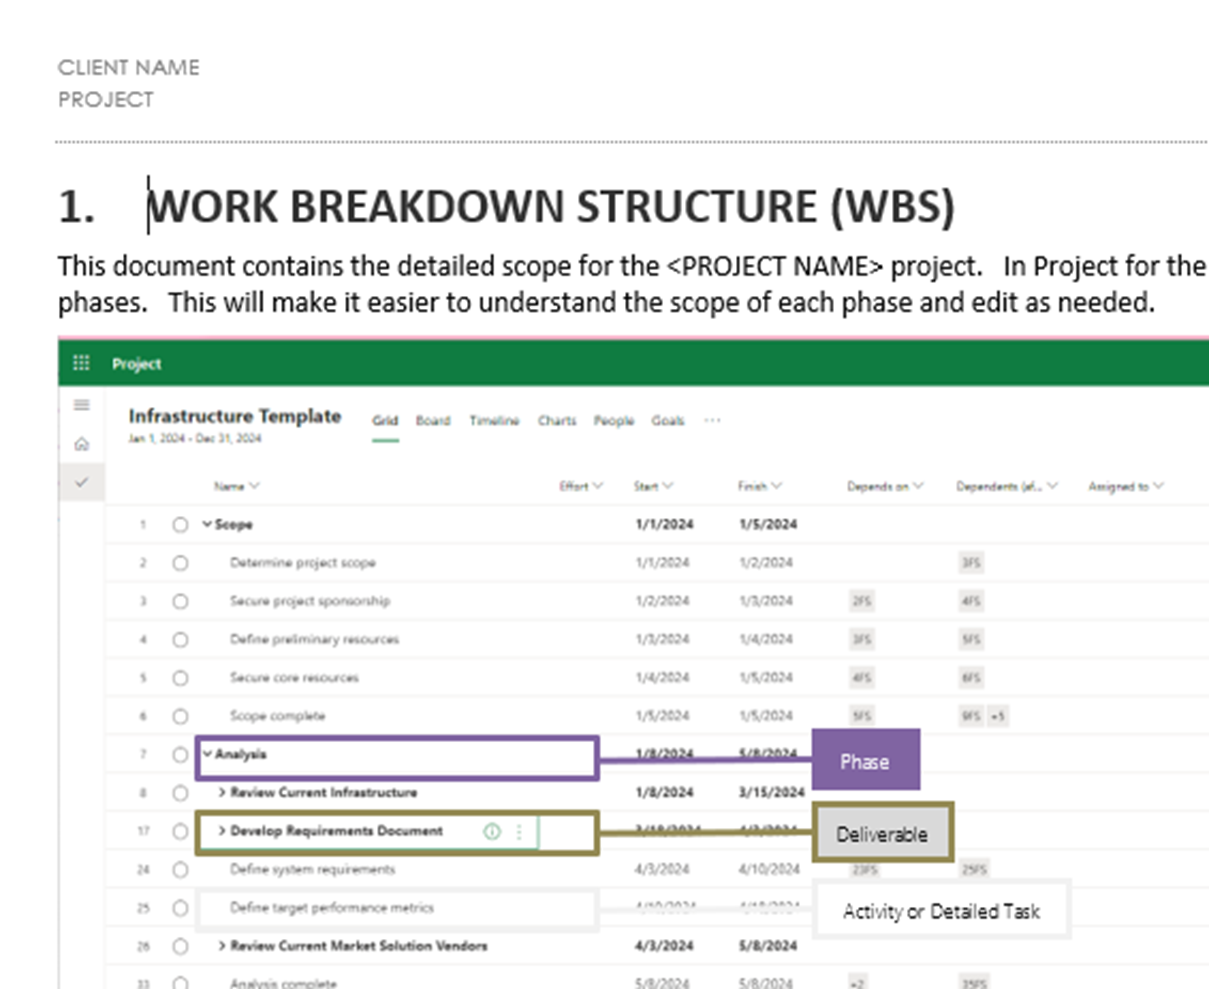 What is a Work Breakdown Structure (WBS)